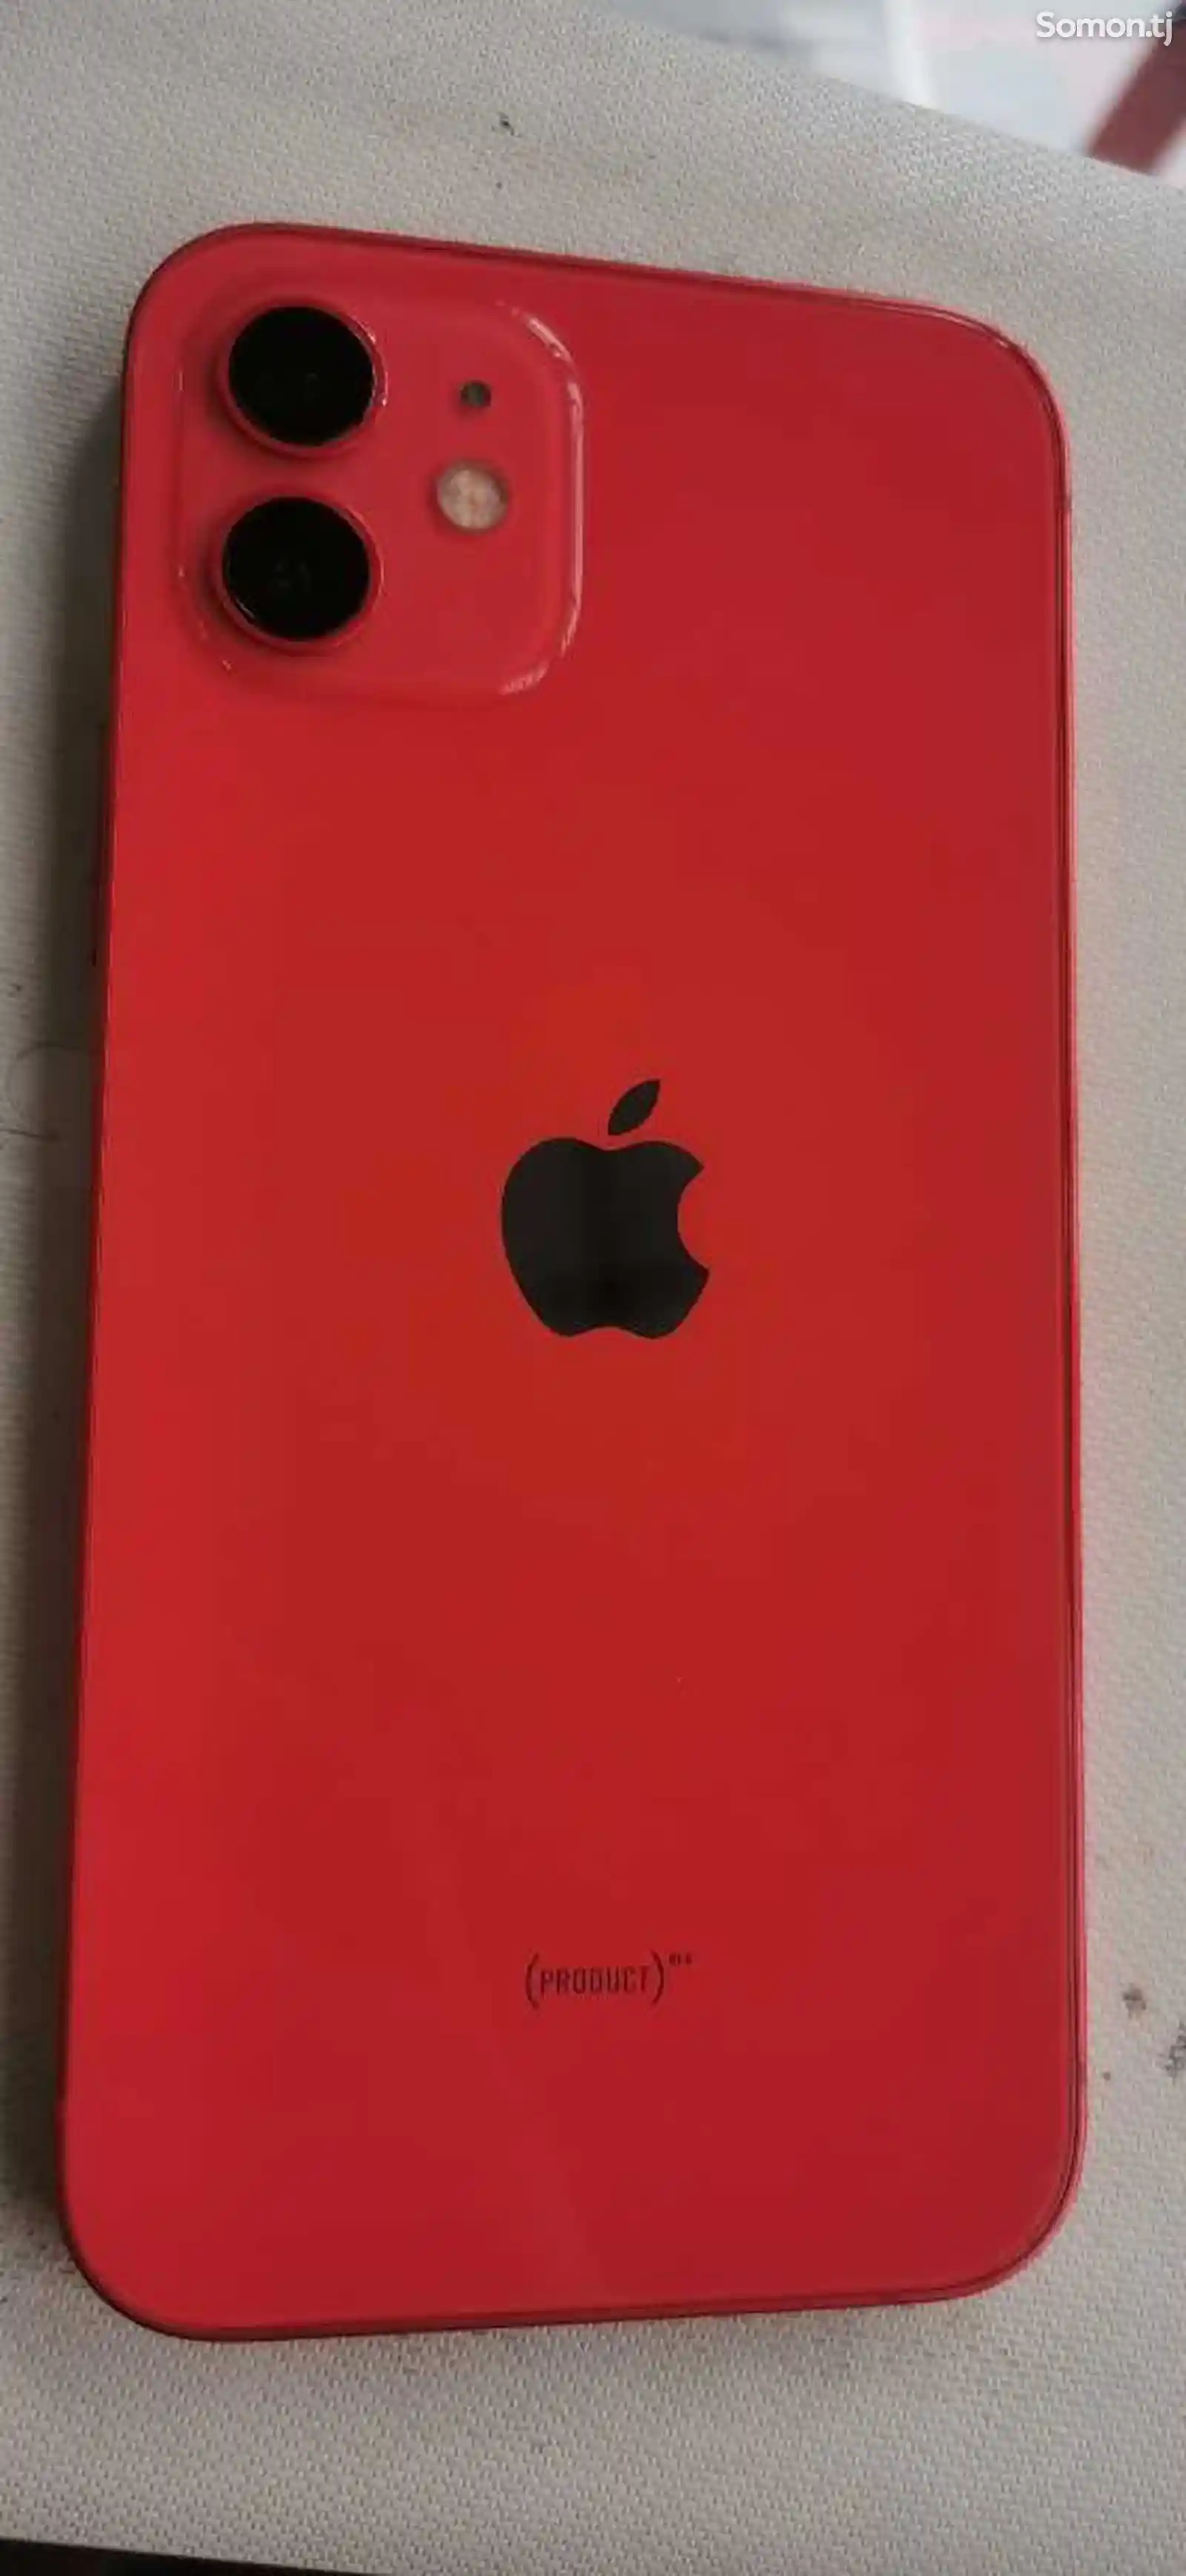 Apple iPhone 12, 128 gb, Product Red-3